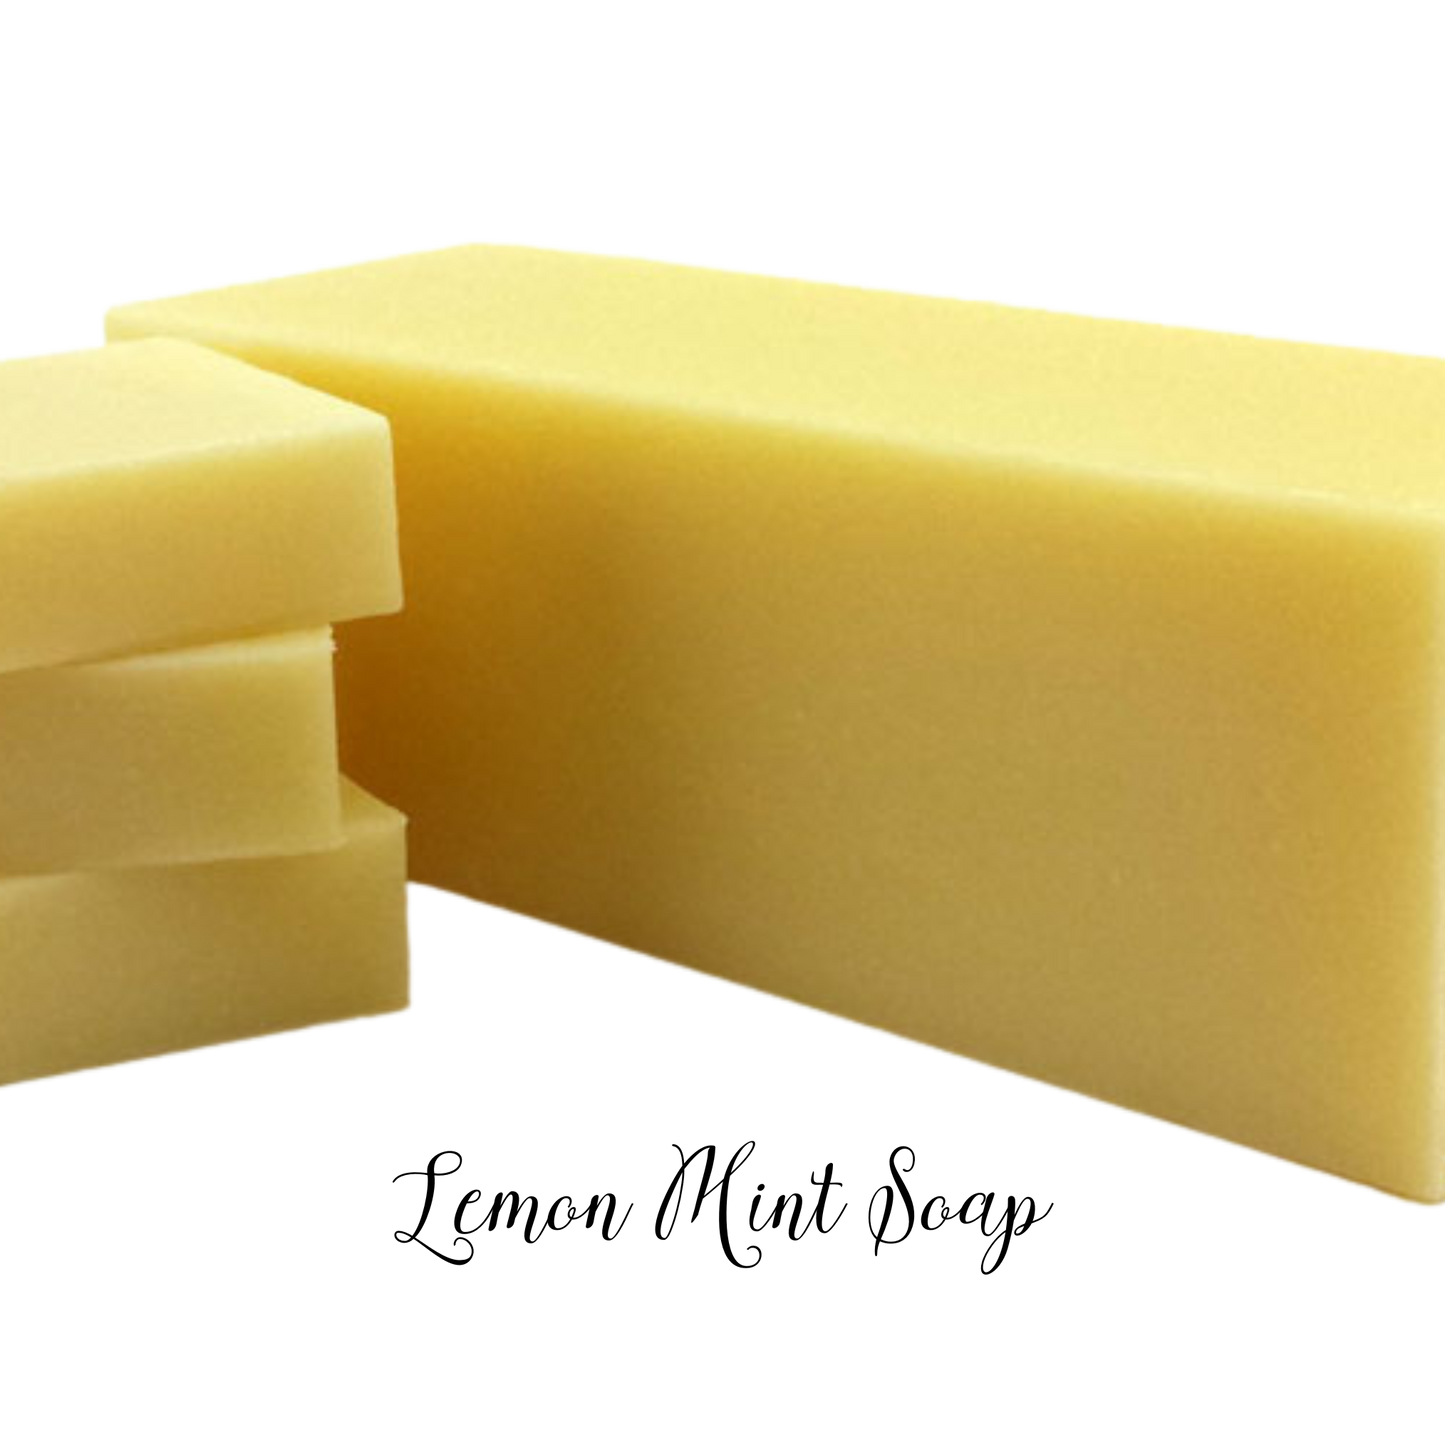 sweet lemon and sweet peppermint oil blended to perfection!   4.5 oz  bar soap